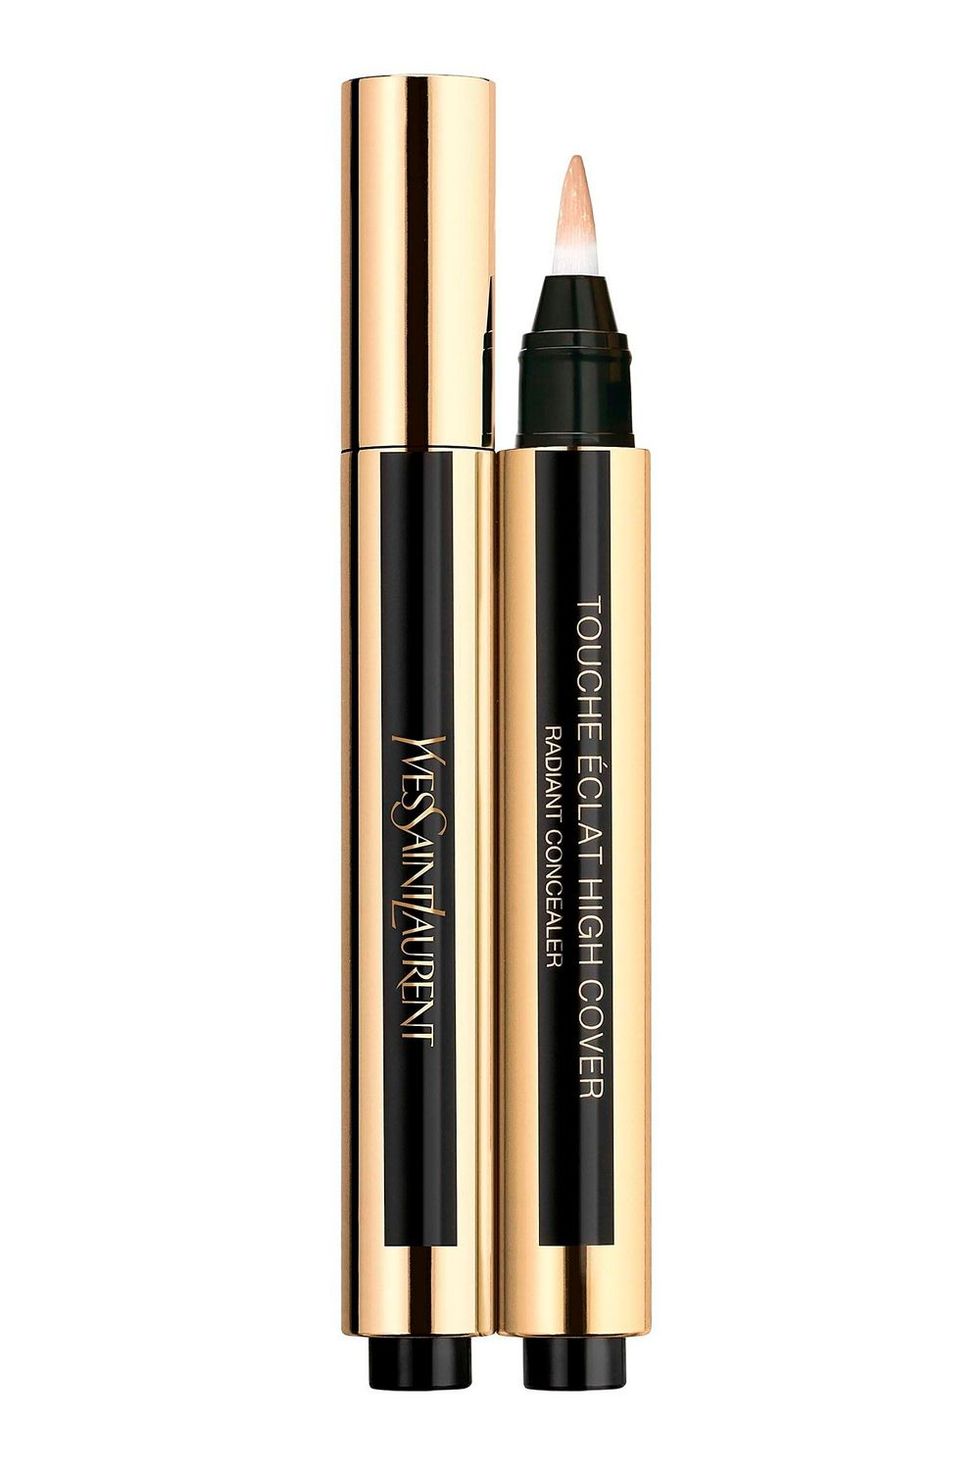 YSL Touche Éclat High Cover Radiant Under-Eye Concealer